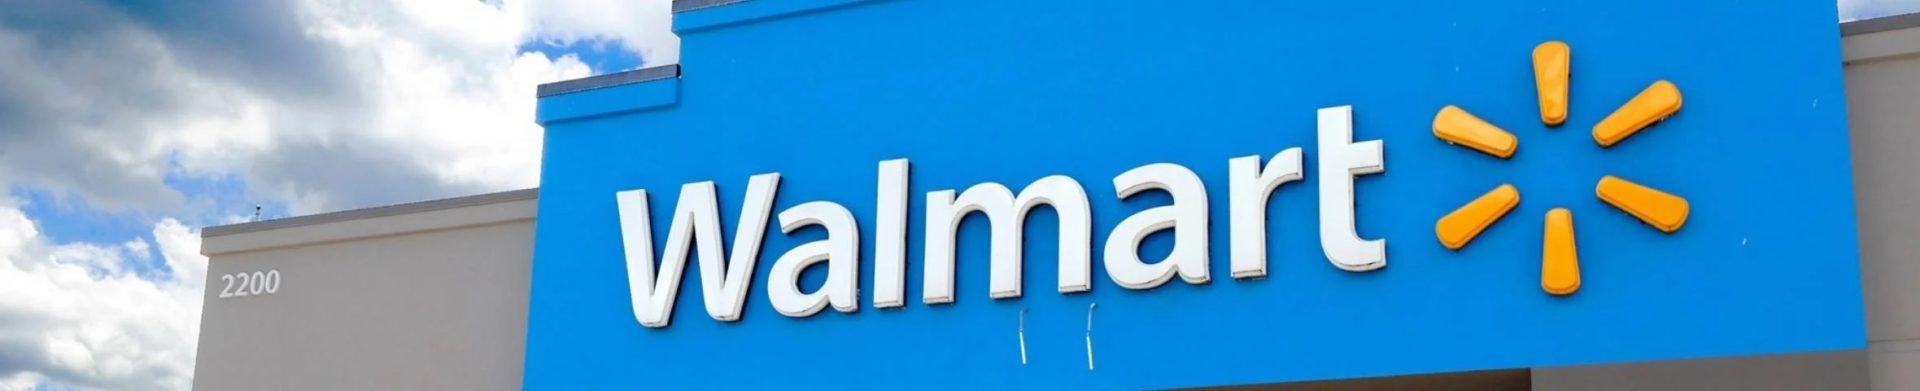 Walmart storefront in the daytime